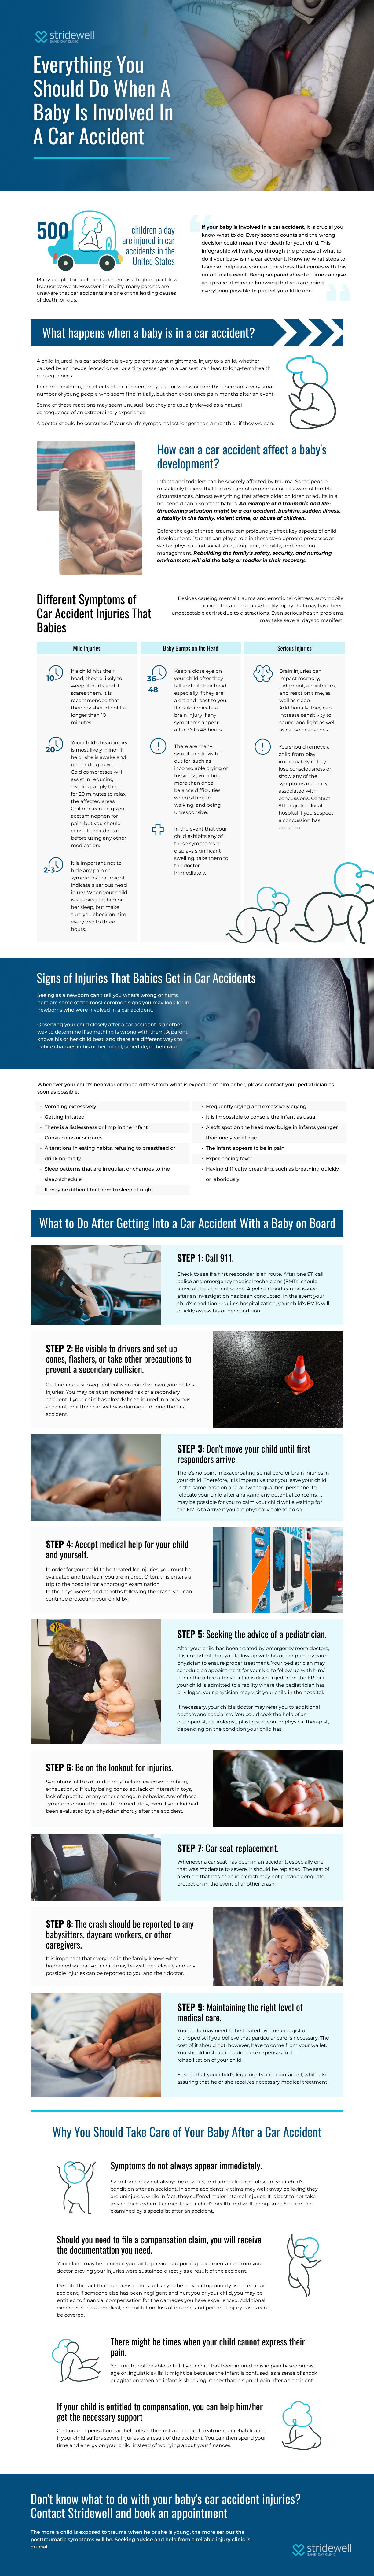 Stridewell Infographic Baby Car Accident